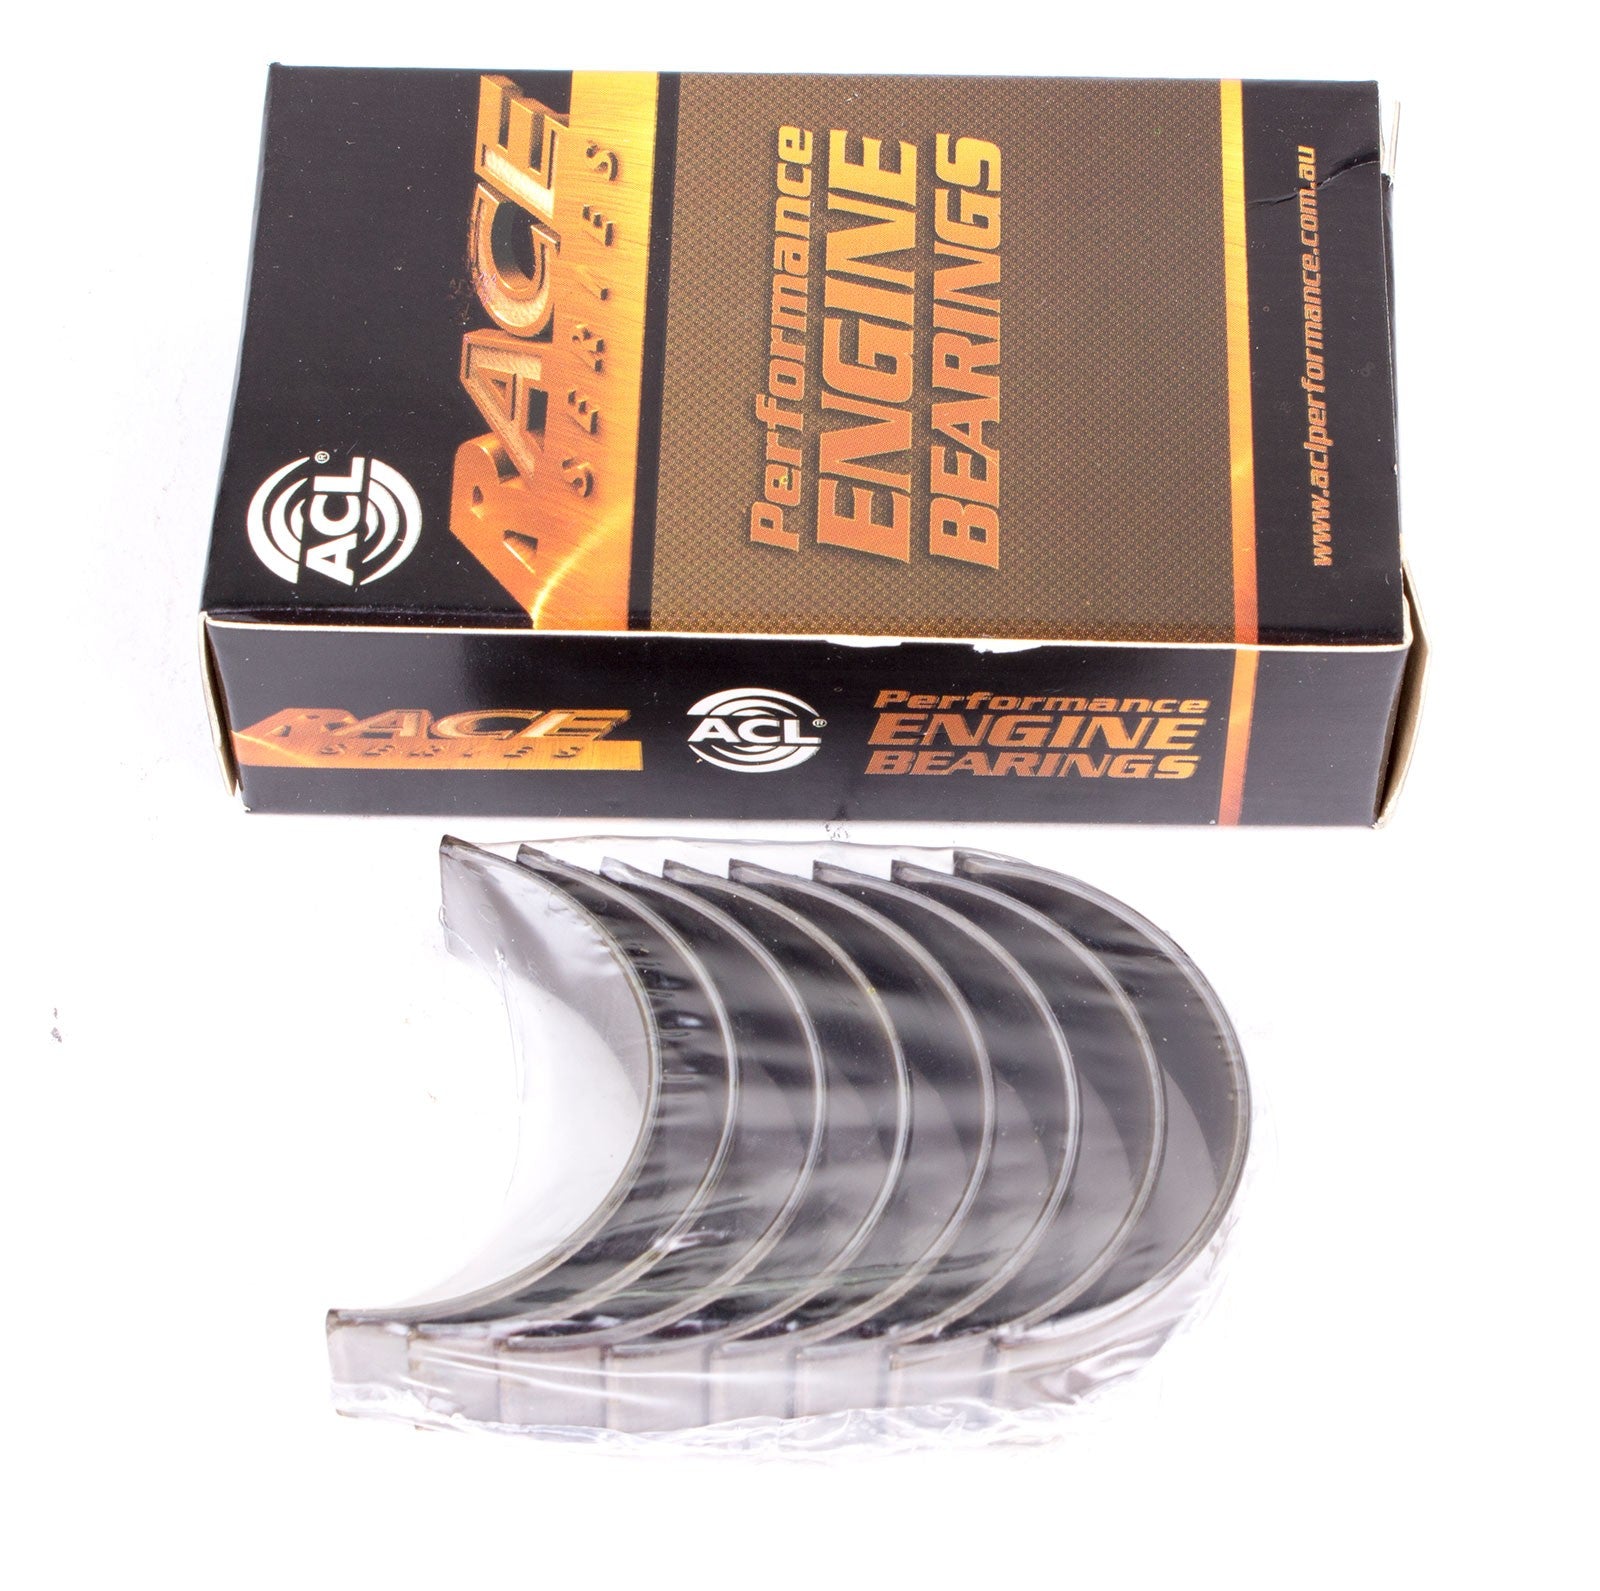 ACL 5M5647H-.025 Main bearing set (ACL Race Series) Photo-0 